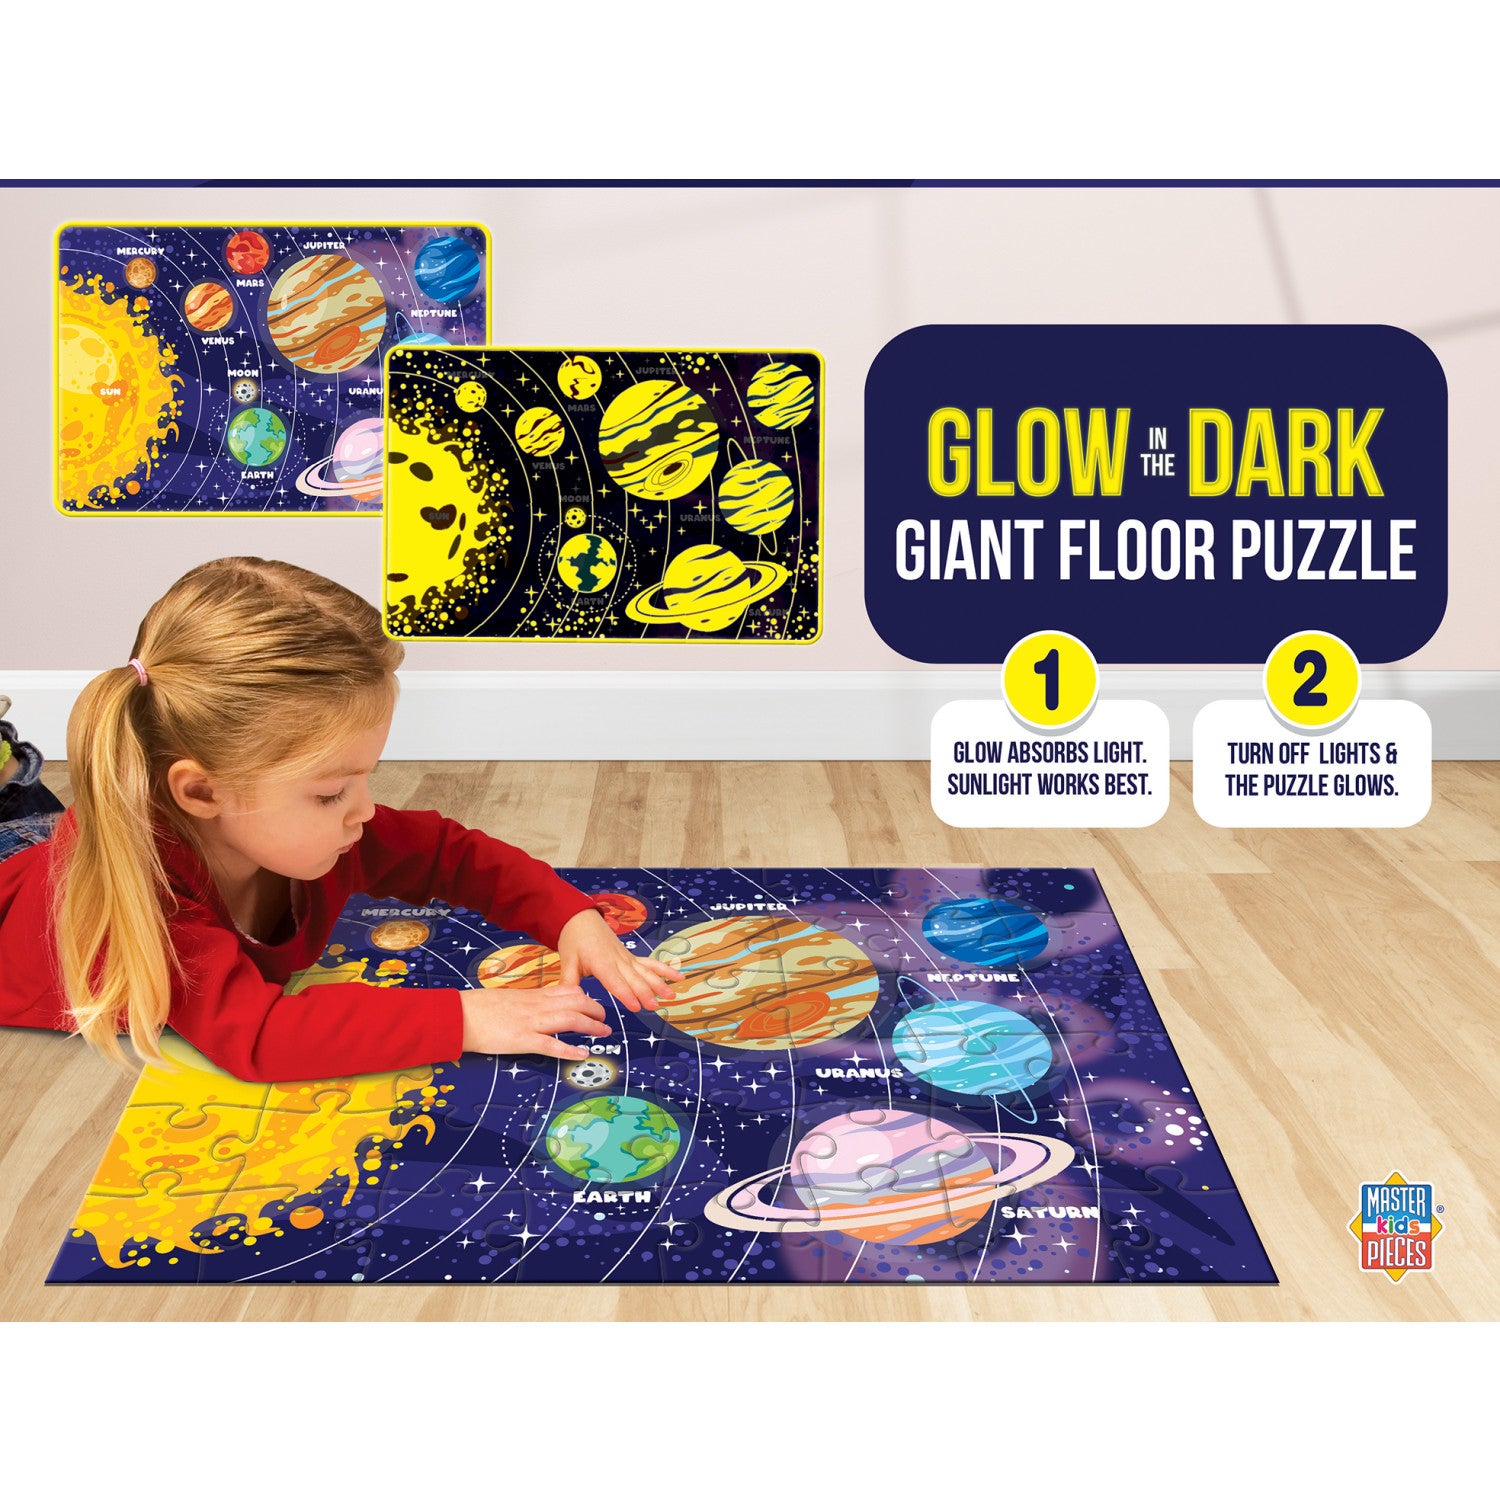 Glow in the Dark - Our Solar System 48 Piece Floor Jigsaw Puzzle